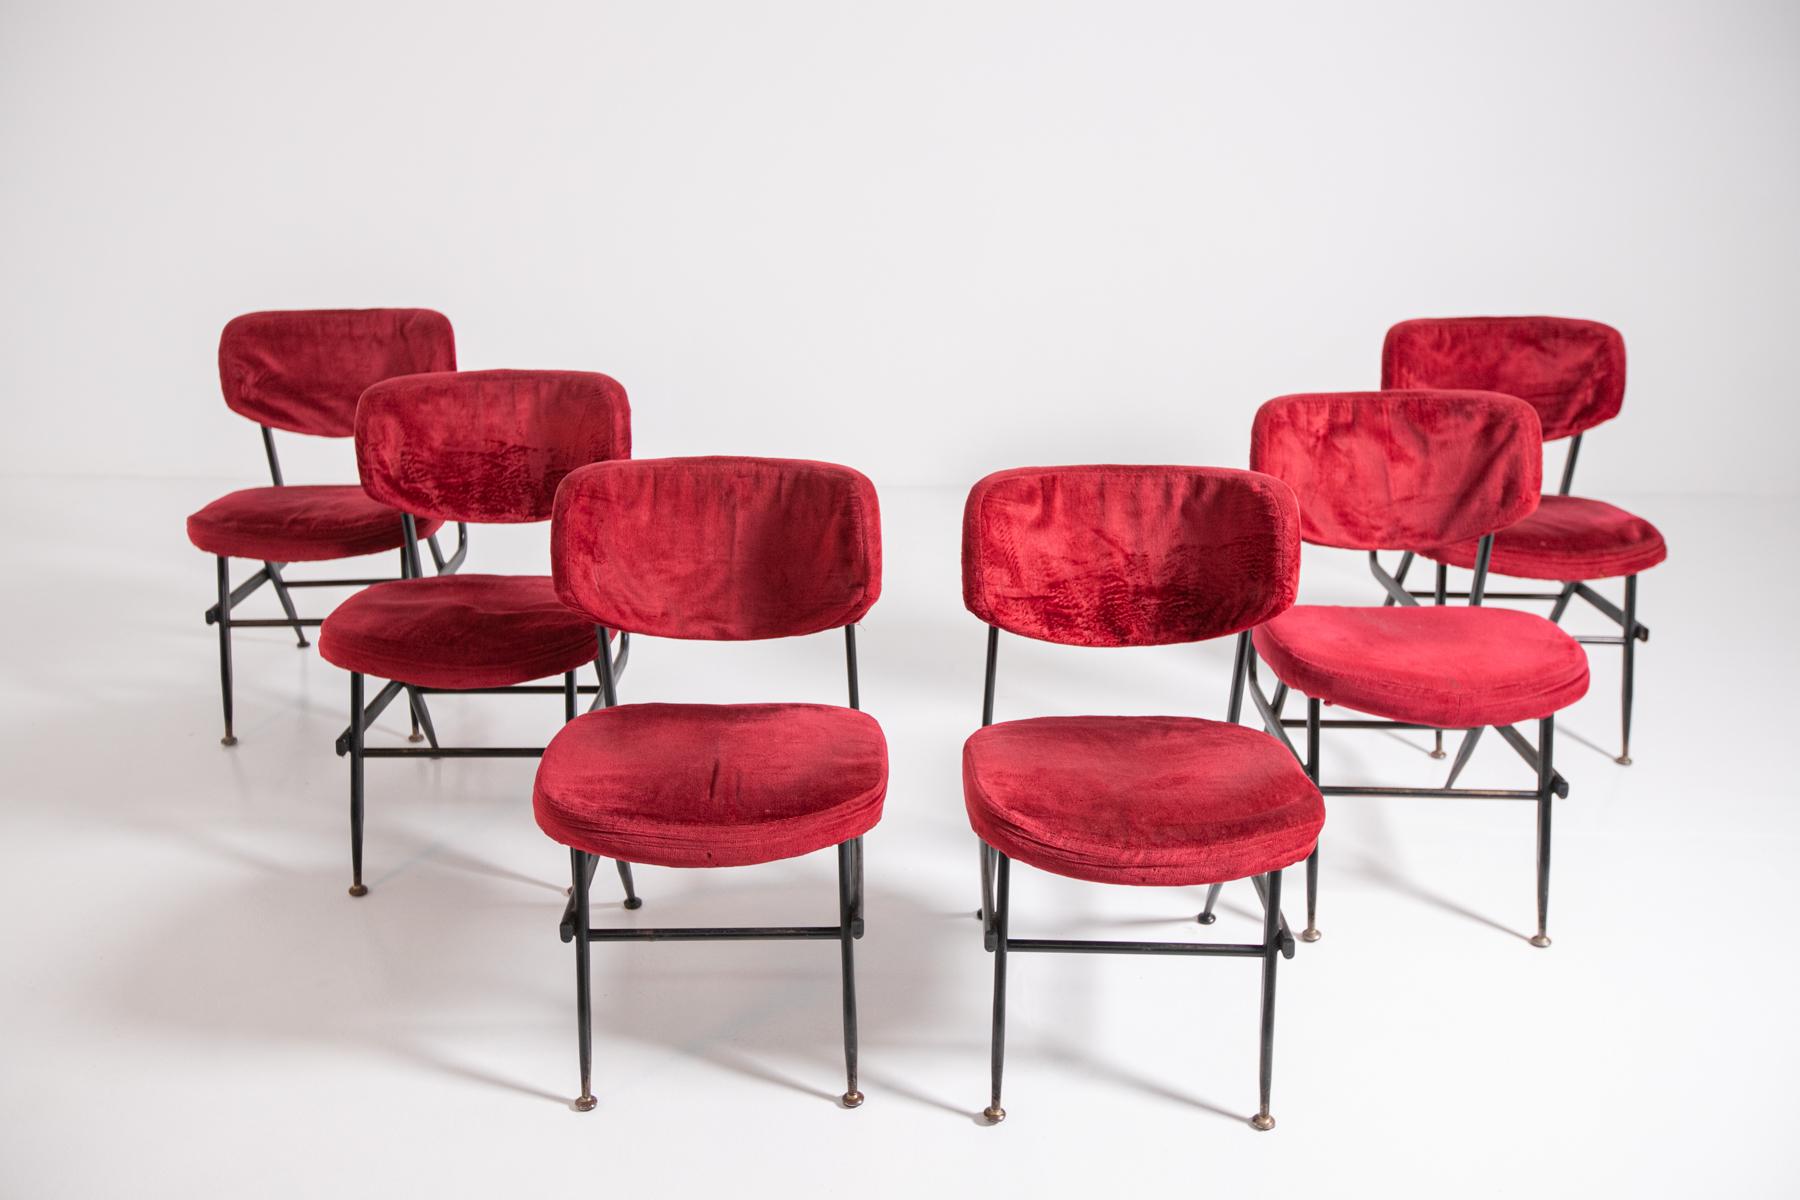 Mid-20th Century Italian Chairs Set of Six in Red Velvet and Iron, 1950s